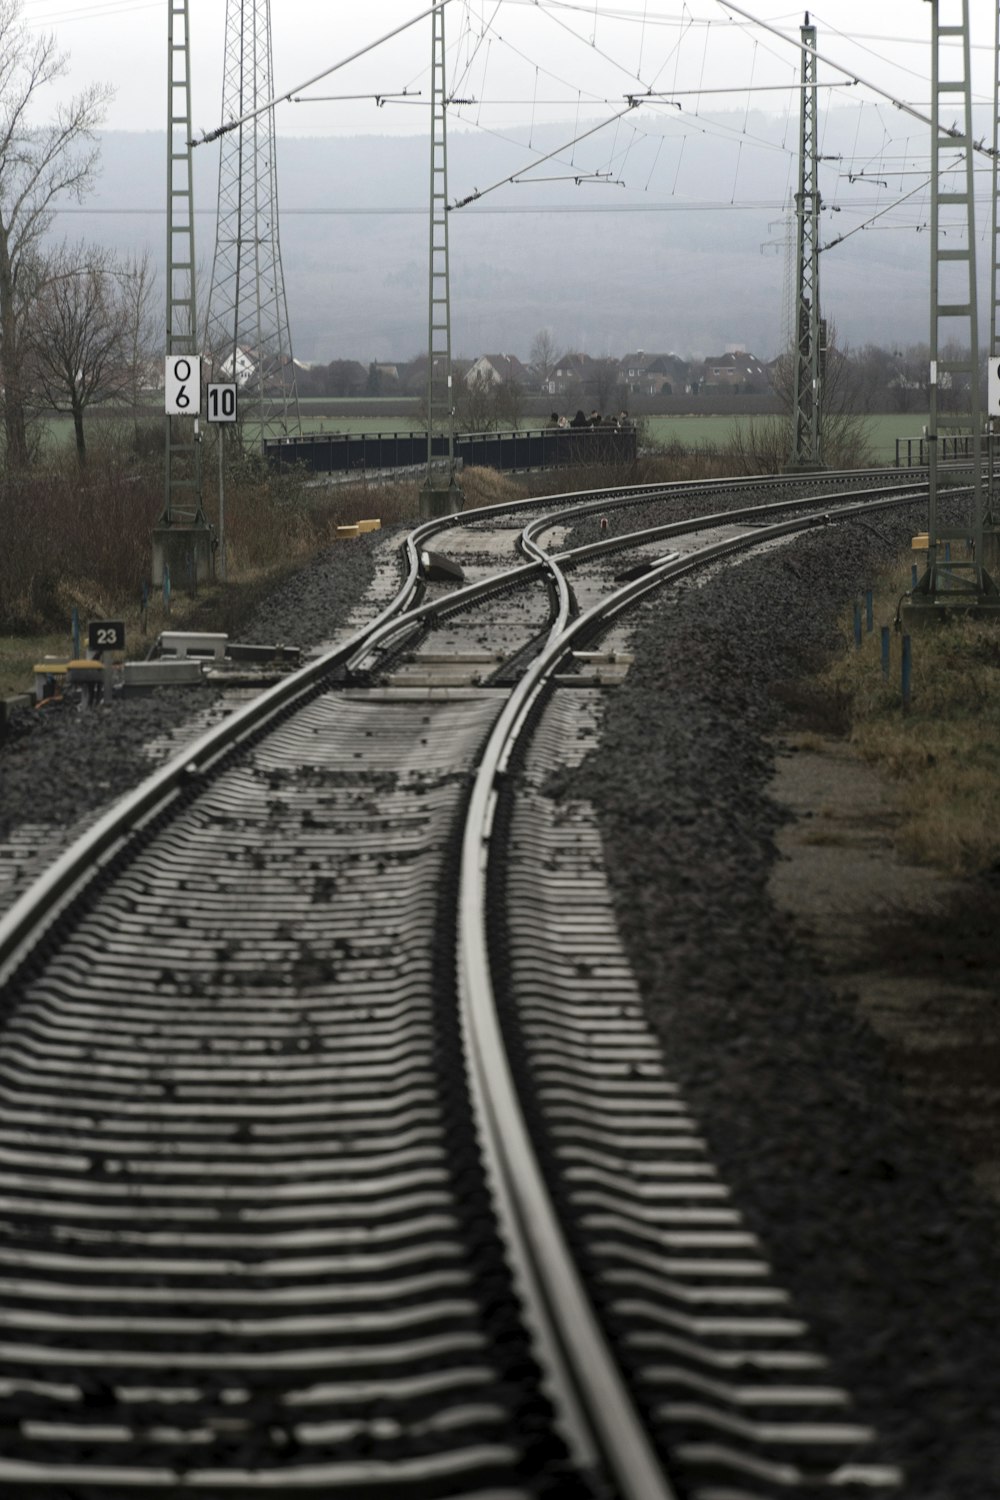 a set of train tracks with power lines in the background